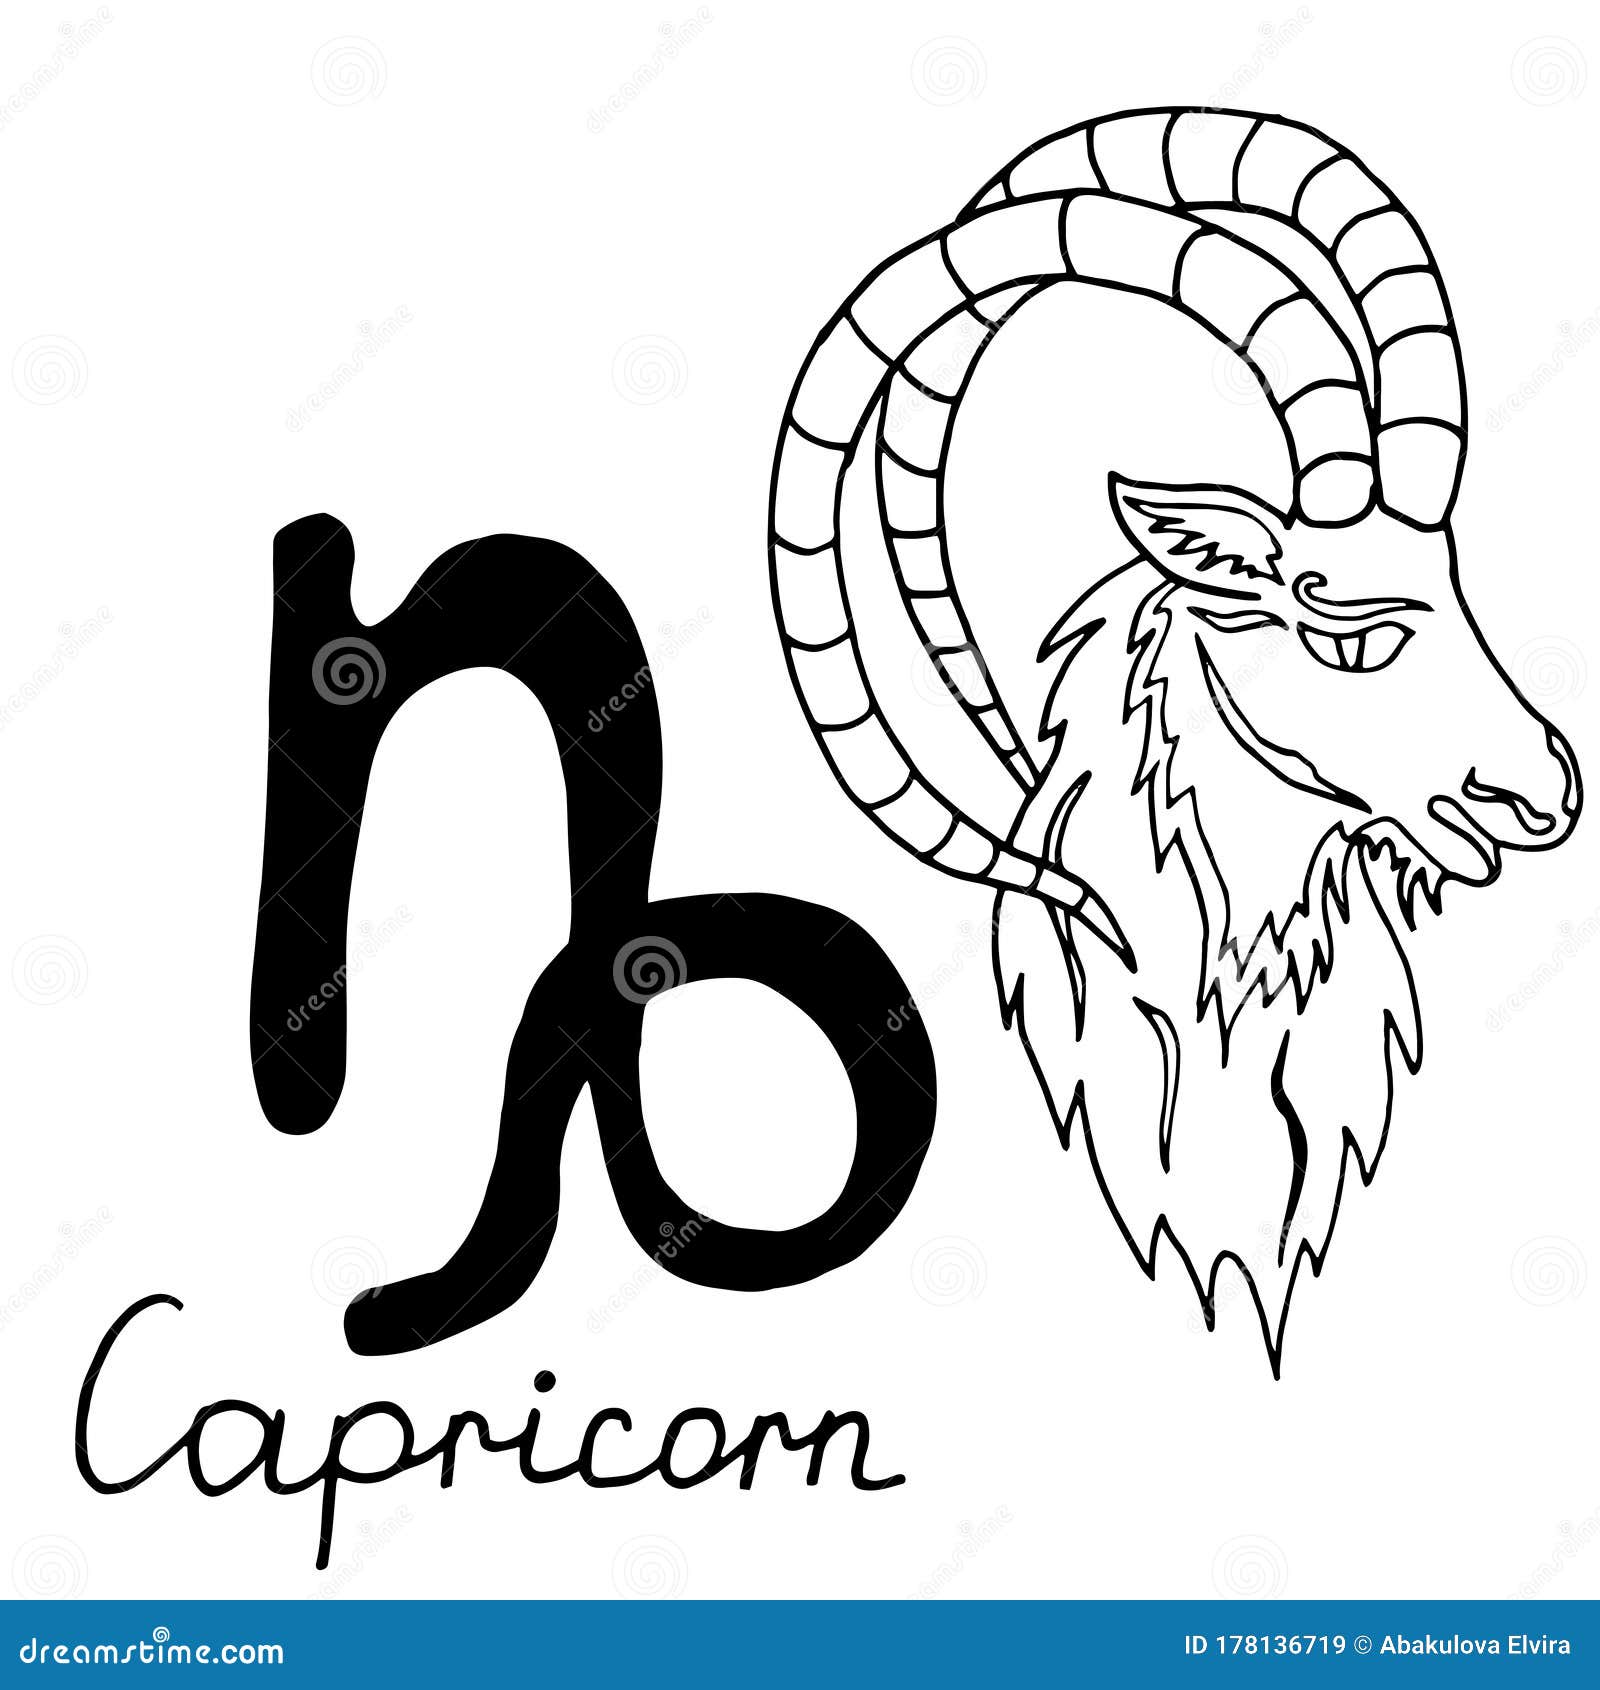 Capricorn Tattoo Designs: Show Off Your Sign With These Stunning Symbol ...